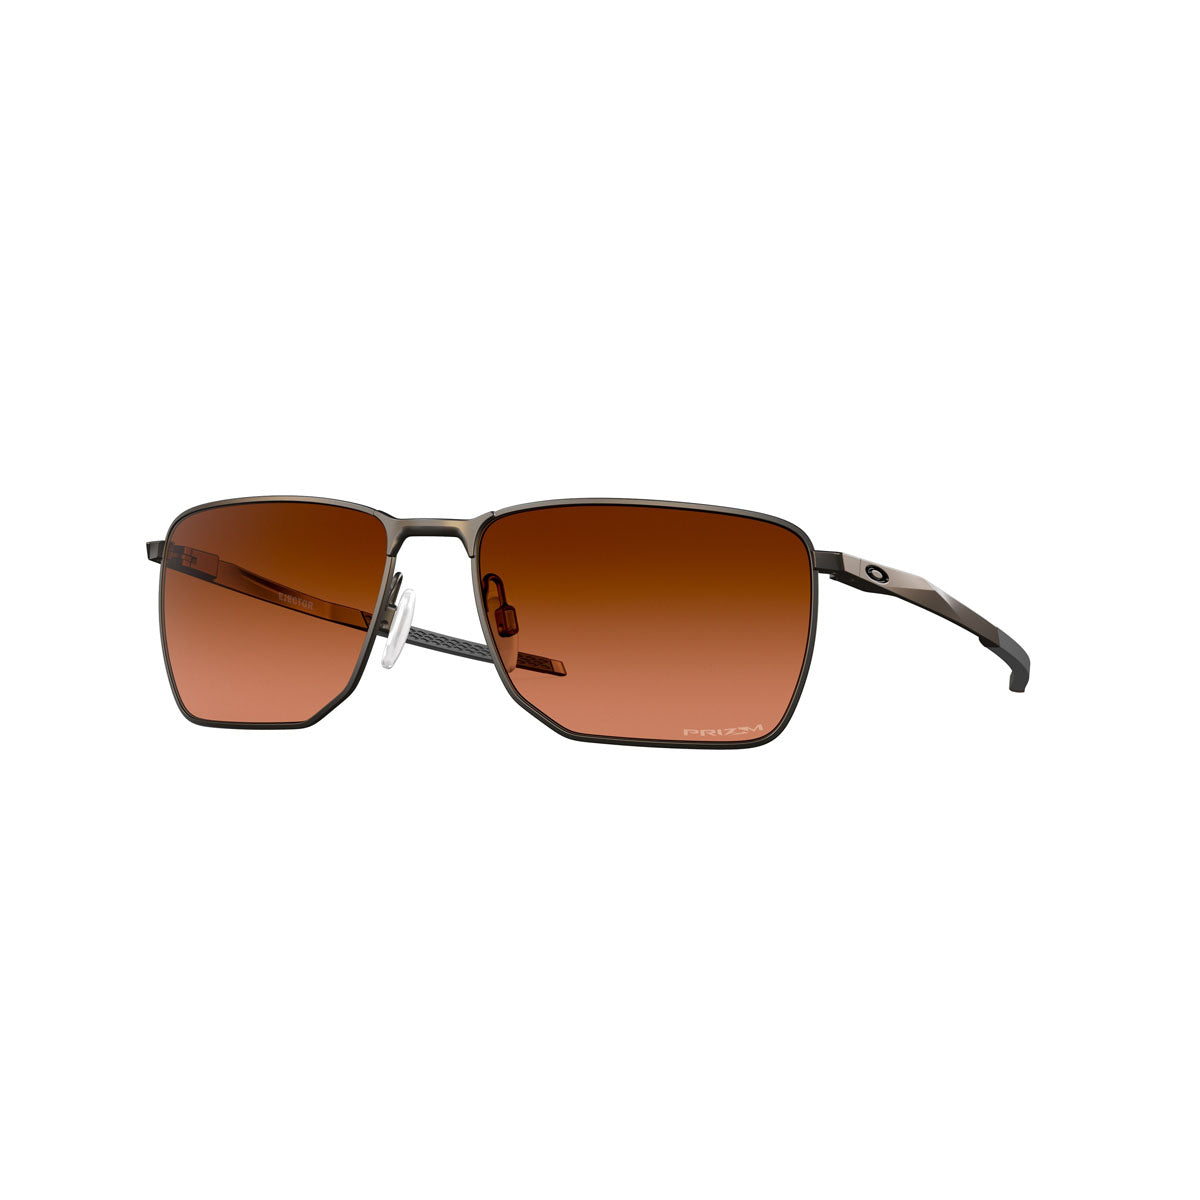 Oakley Ejector Sunglasses - Pewter/PRIZM Brown Gradient